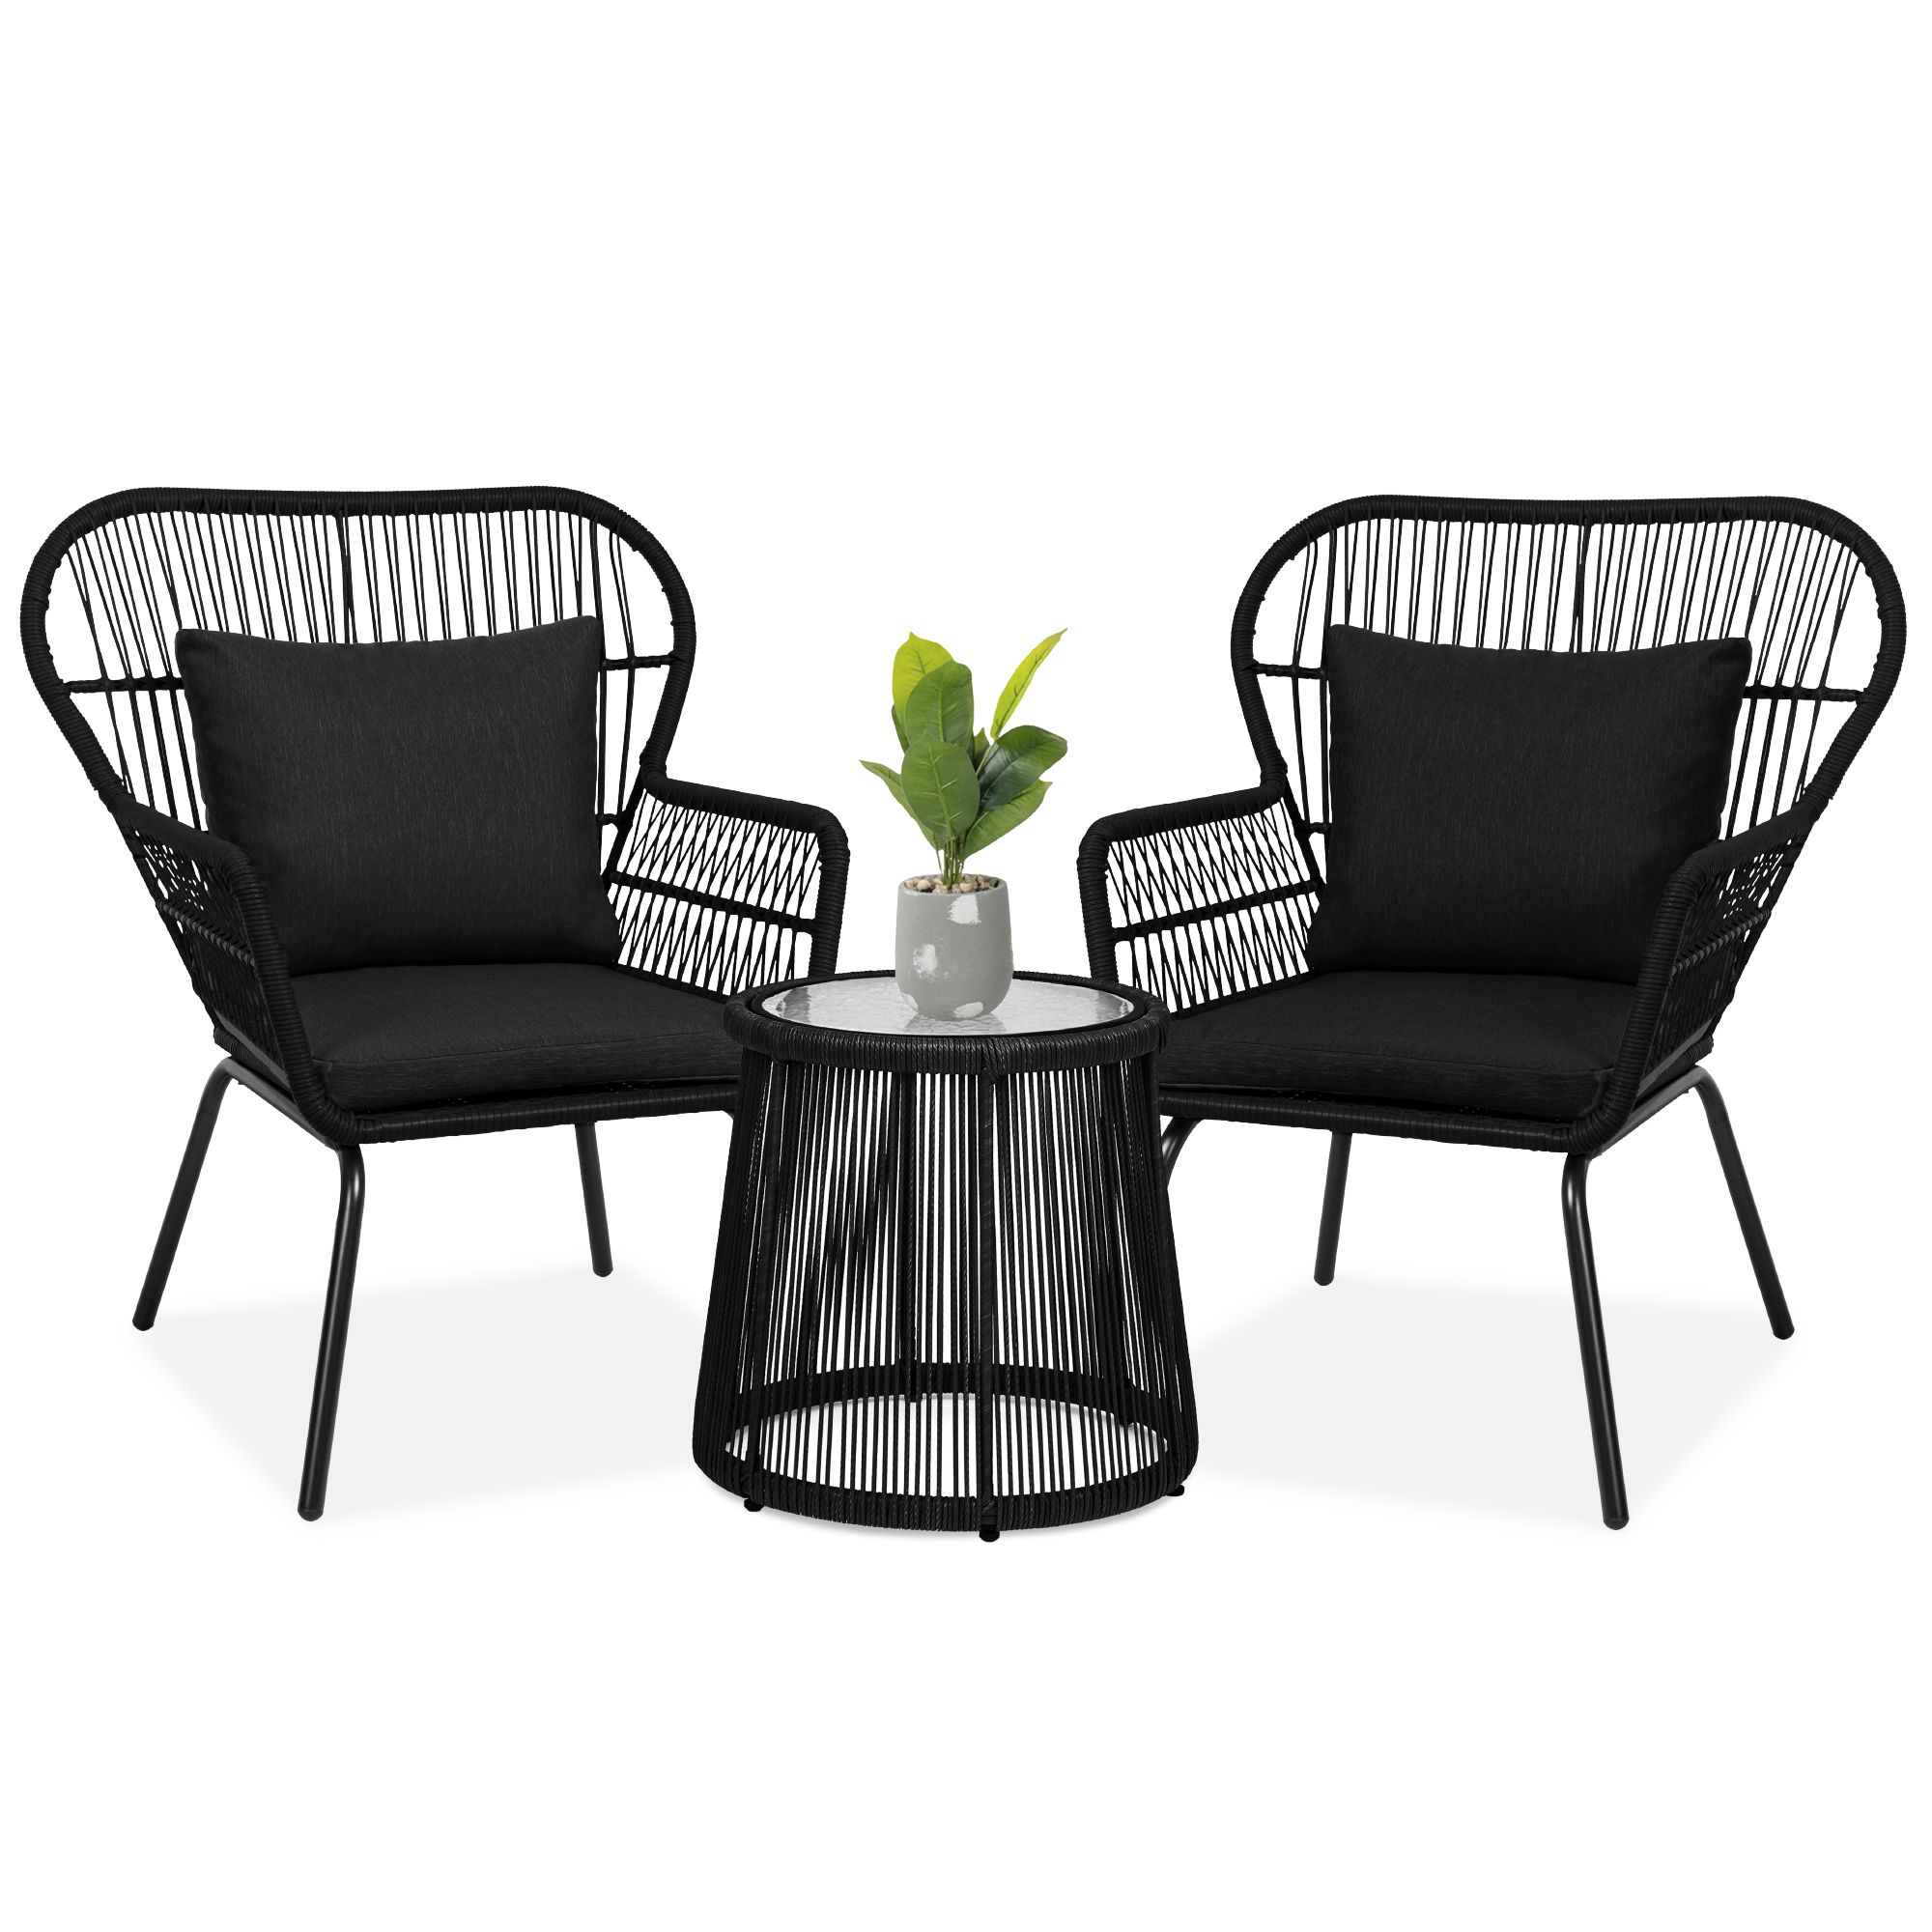 Best Choice Products 3 Piece Patio Conversation Bistro Set, Outdoor Throughout 2019 Black Cushion Patio Conversation Sets (View 8 of 15)